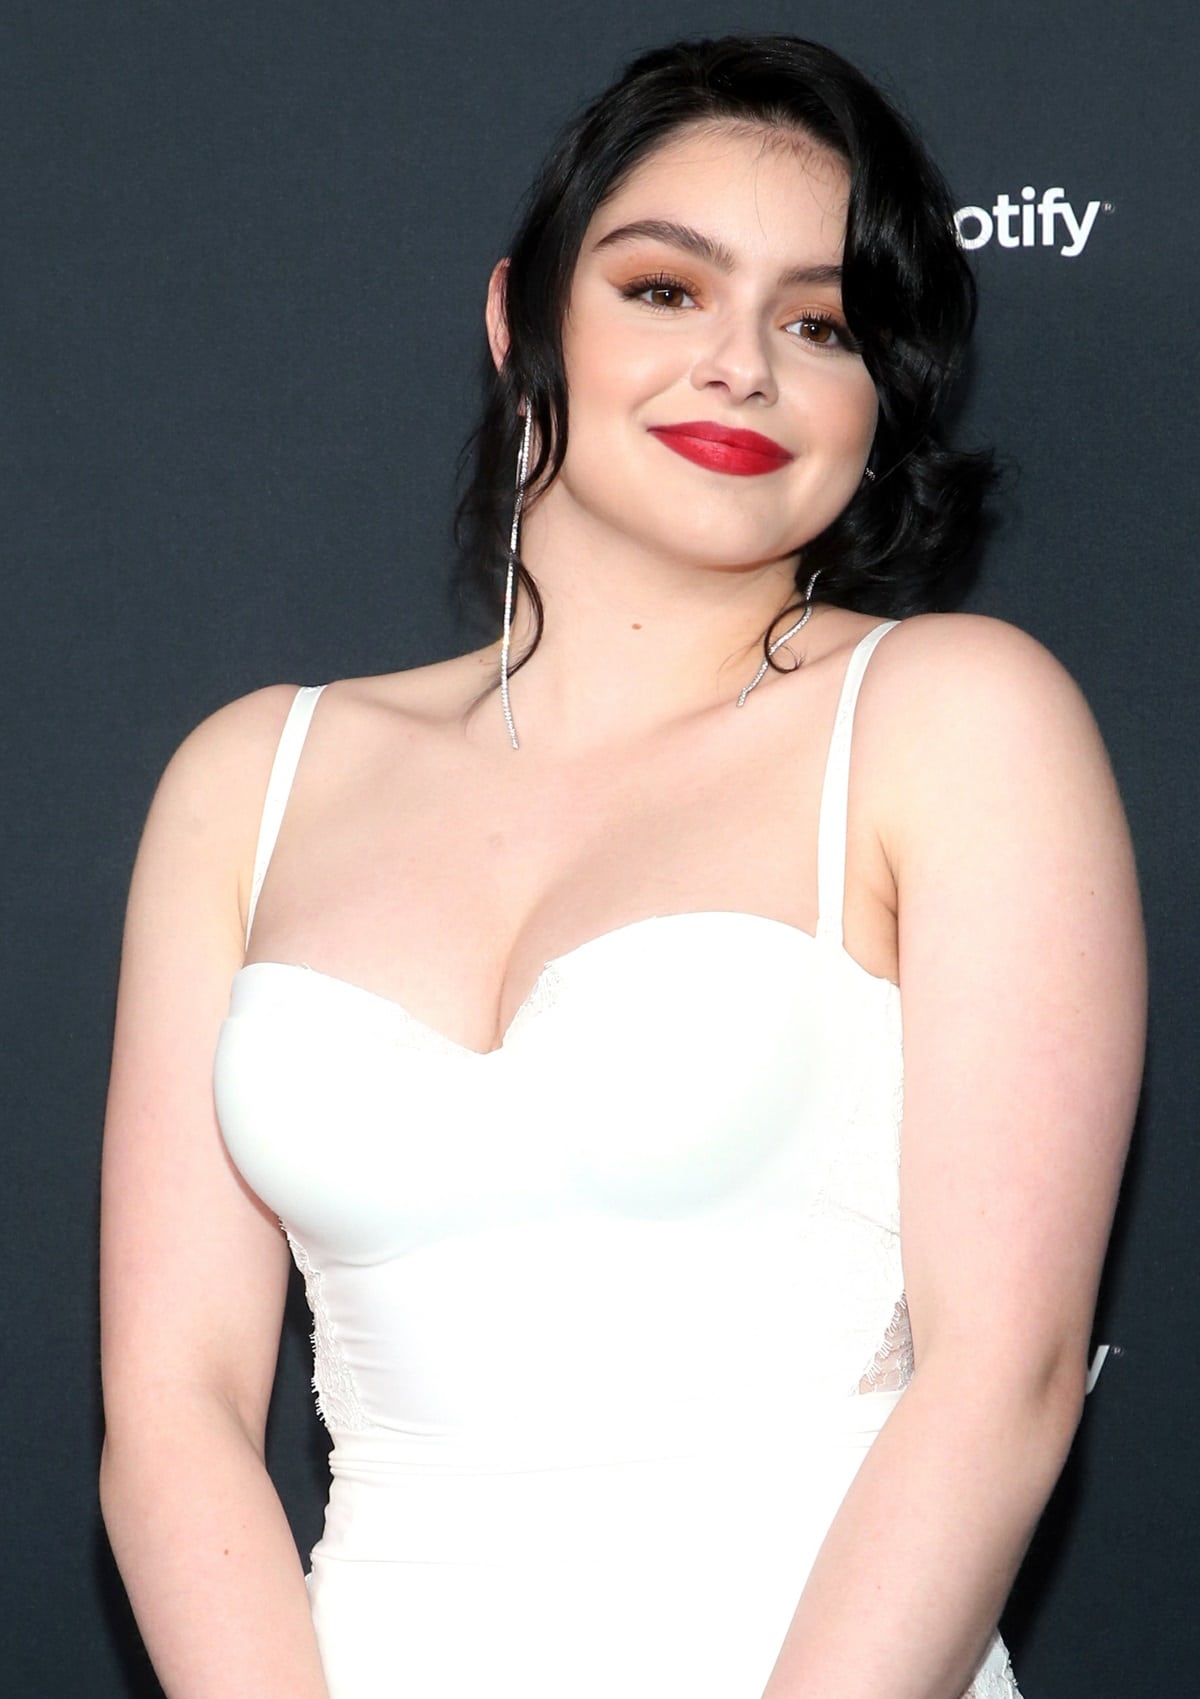 Ariel Winter has been vocal about her positive experience and has encouraged others who may be struggling with similar issues to consider breast reduction surgery as a viable option